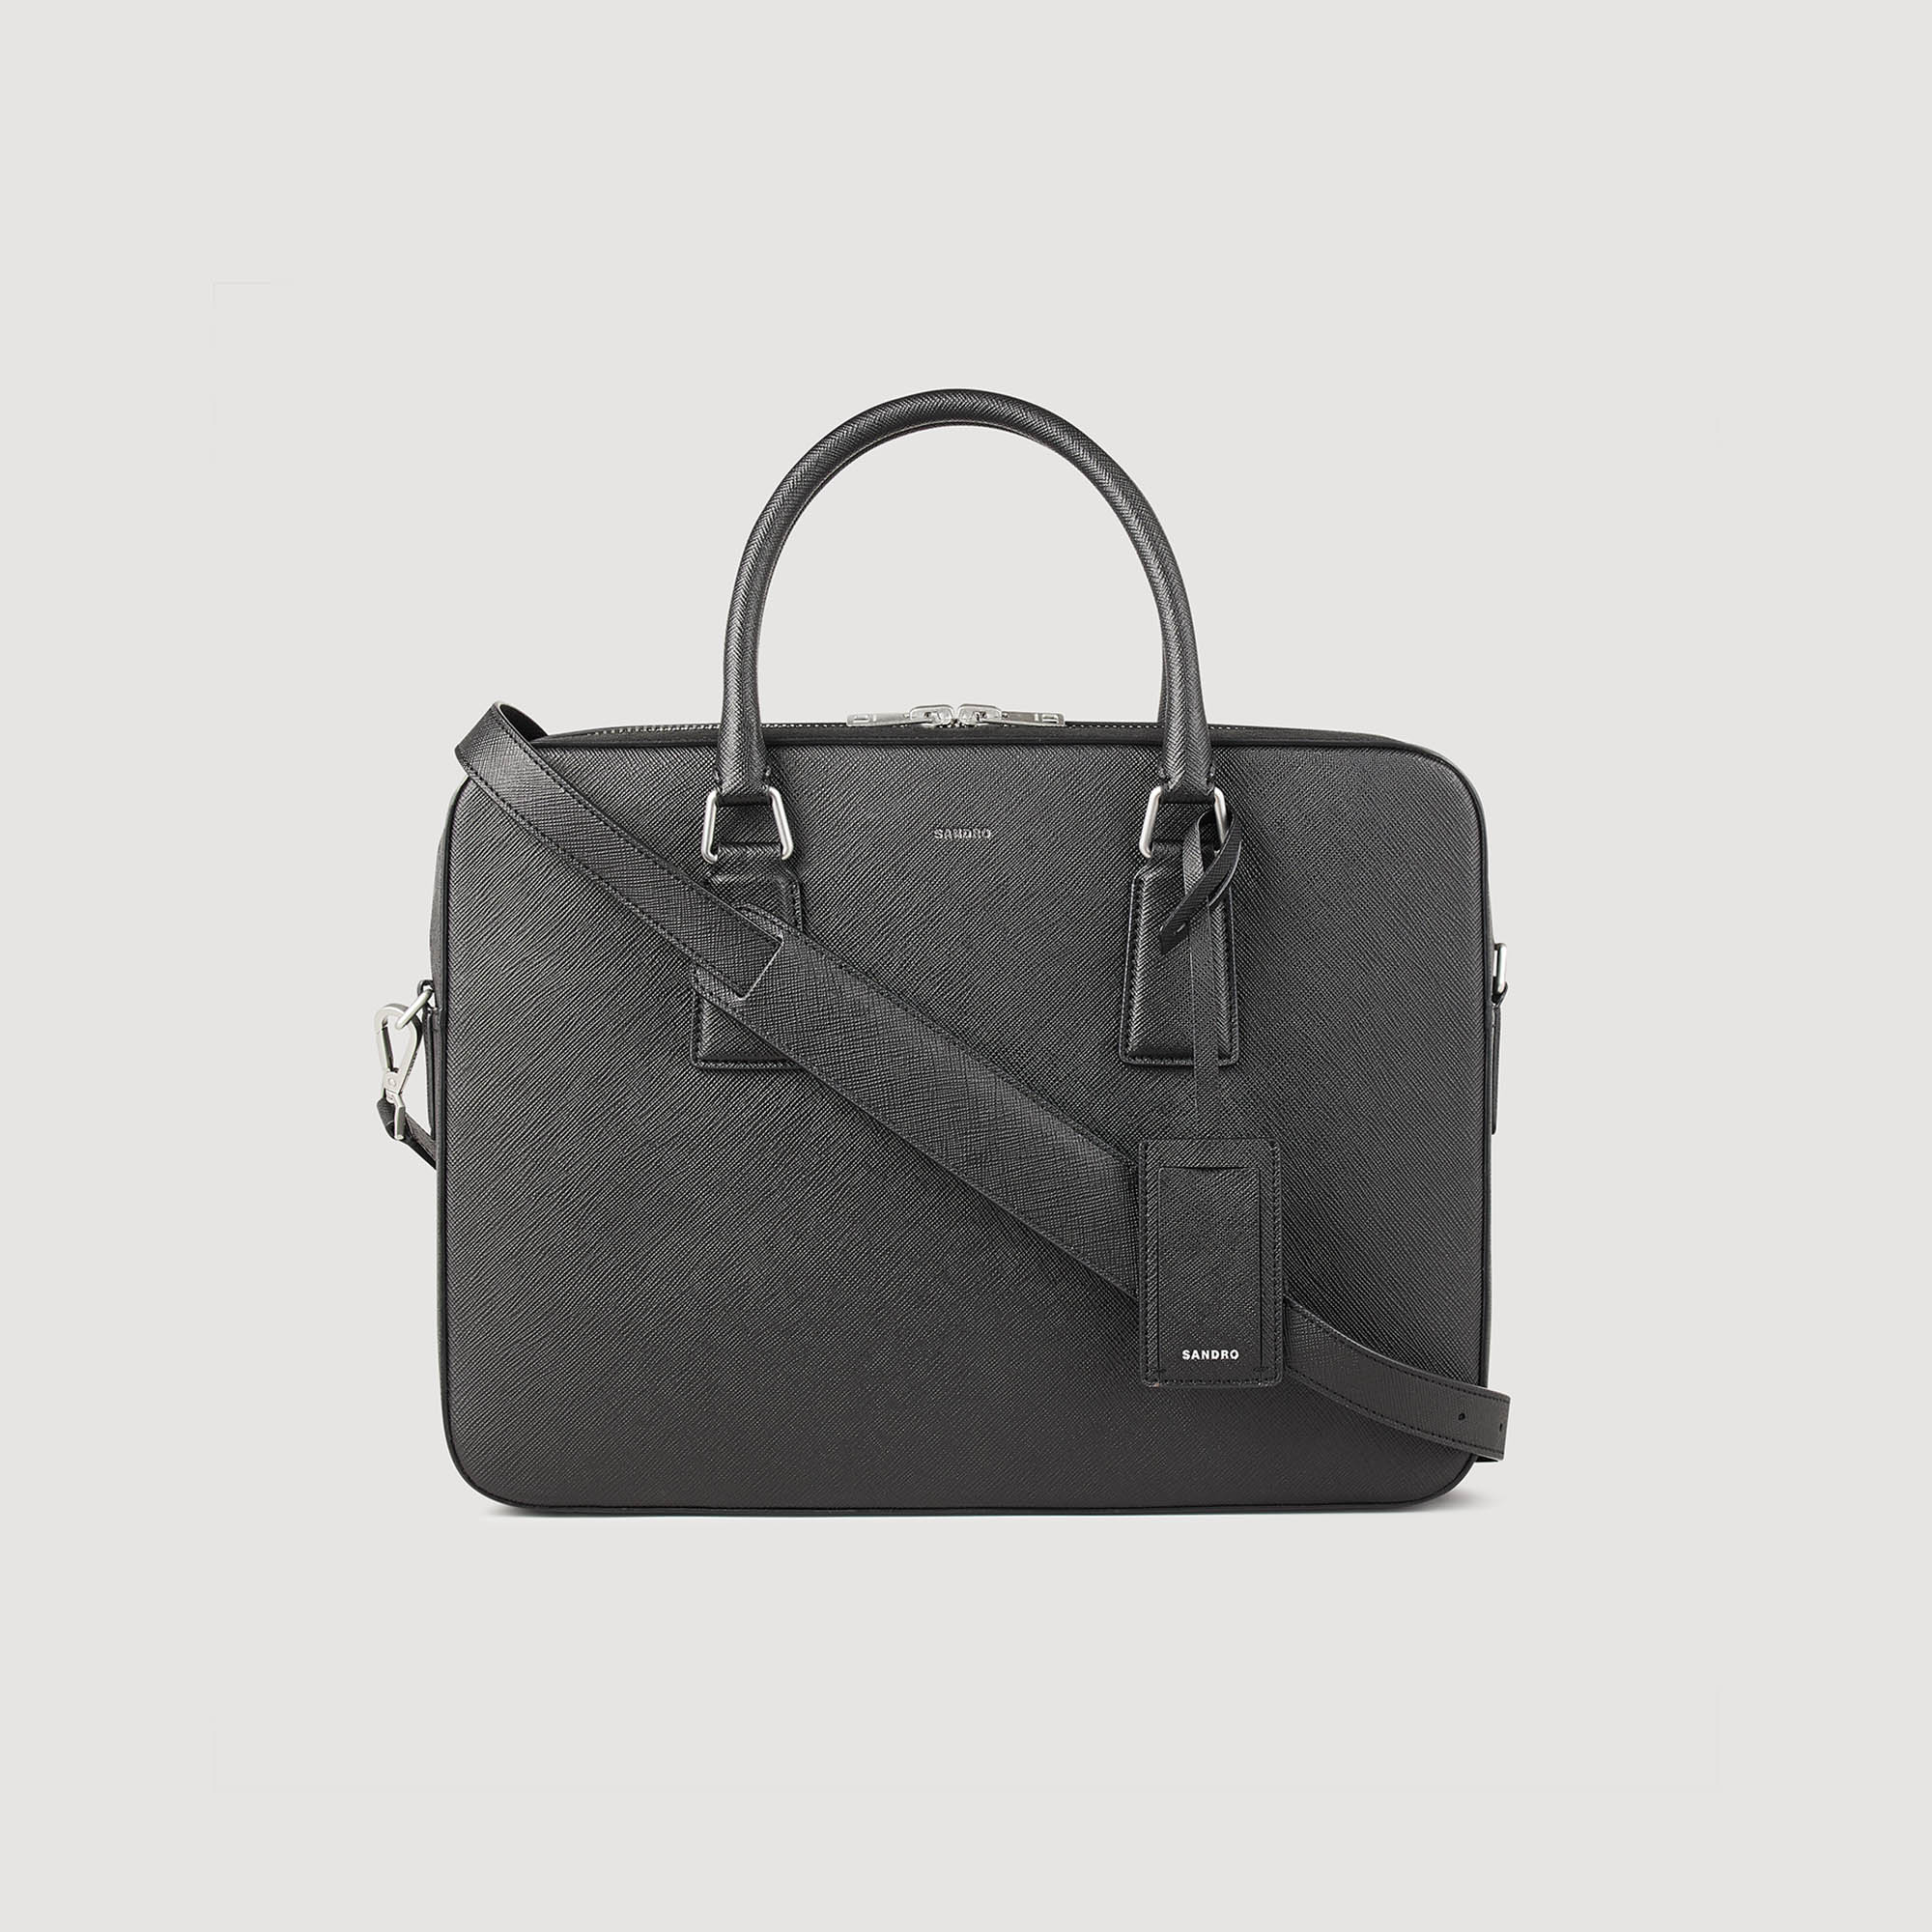 Sandro synderm Lining: Sandro men's briefcase Saffiano leather briefcase Large central compartment Embossed Sandro logo Laptop compartment Adjustable shoulder strap Technical fabric lining Luggage tag Dimensions: 11 x 15 x 3 in This item's main material is at least 50% recycled